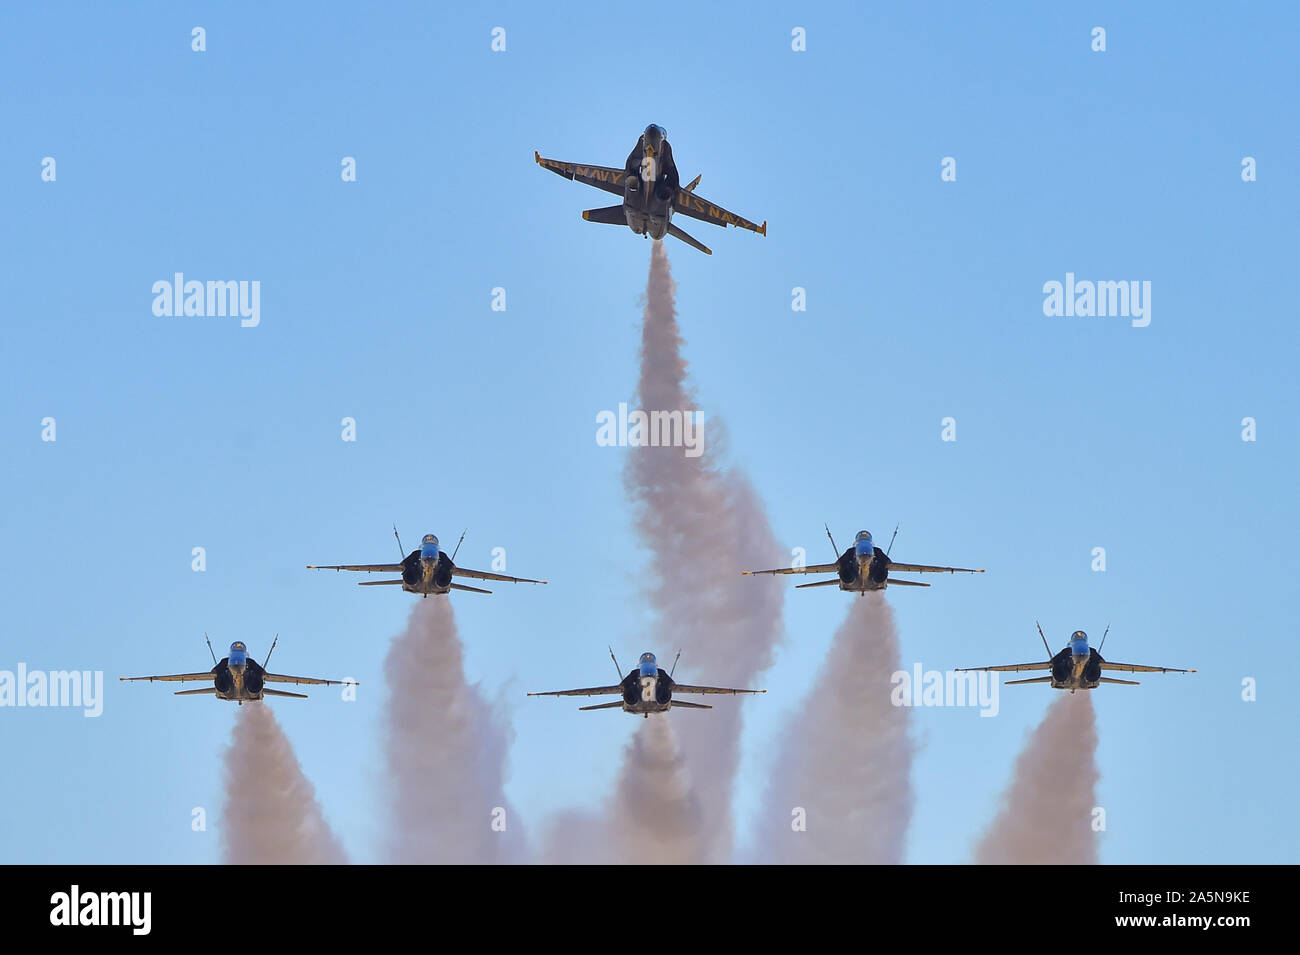 191006-N-UK306-1875 SACRAMENTO, Calif. (Oct. 6, 2019) The U.S. Navy Flight Demonstration Squadron, the Blue Angels, pilots perform the pitch-up break maneuver during the 2019 California Capital Air Show in Sacramento. The Blue Angels are scheduled to conduct 61 flight demonstrations at 32 locations across the country to showcase the pride and professionalism of the U.S. Navy and Marine Corps to the American and Canadian public in 2019. (U.S. Navy photo by Mass Communication Specialist 2nd Class Timothy Schumaker/Released) Stock Photo